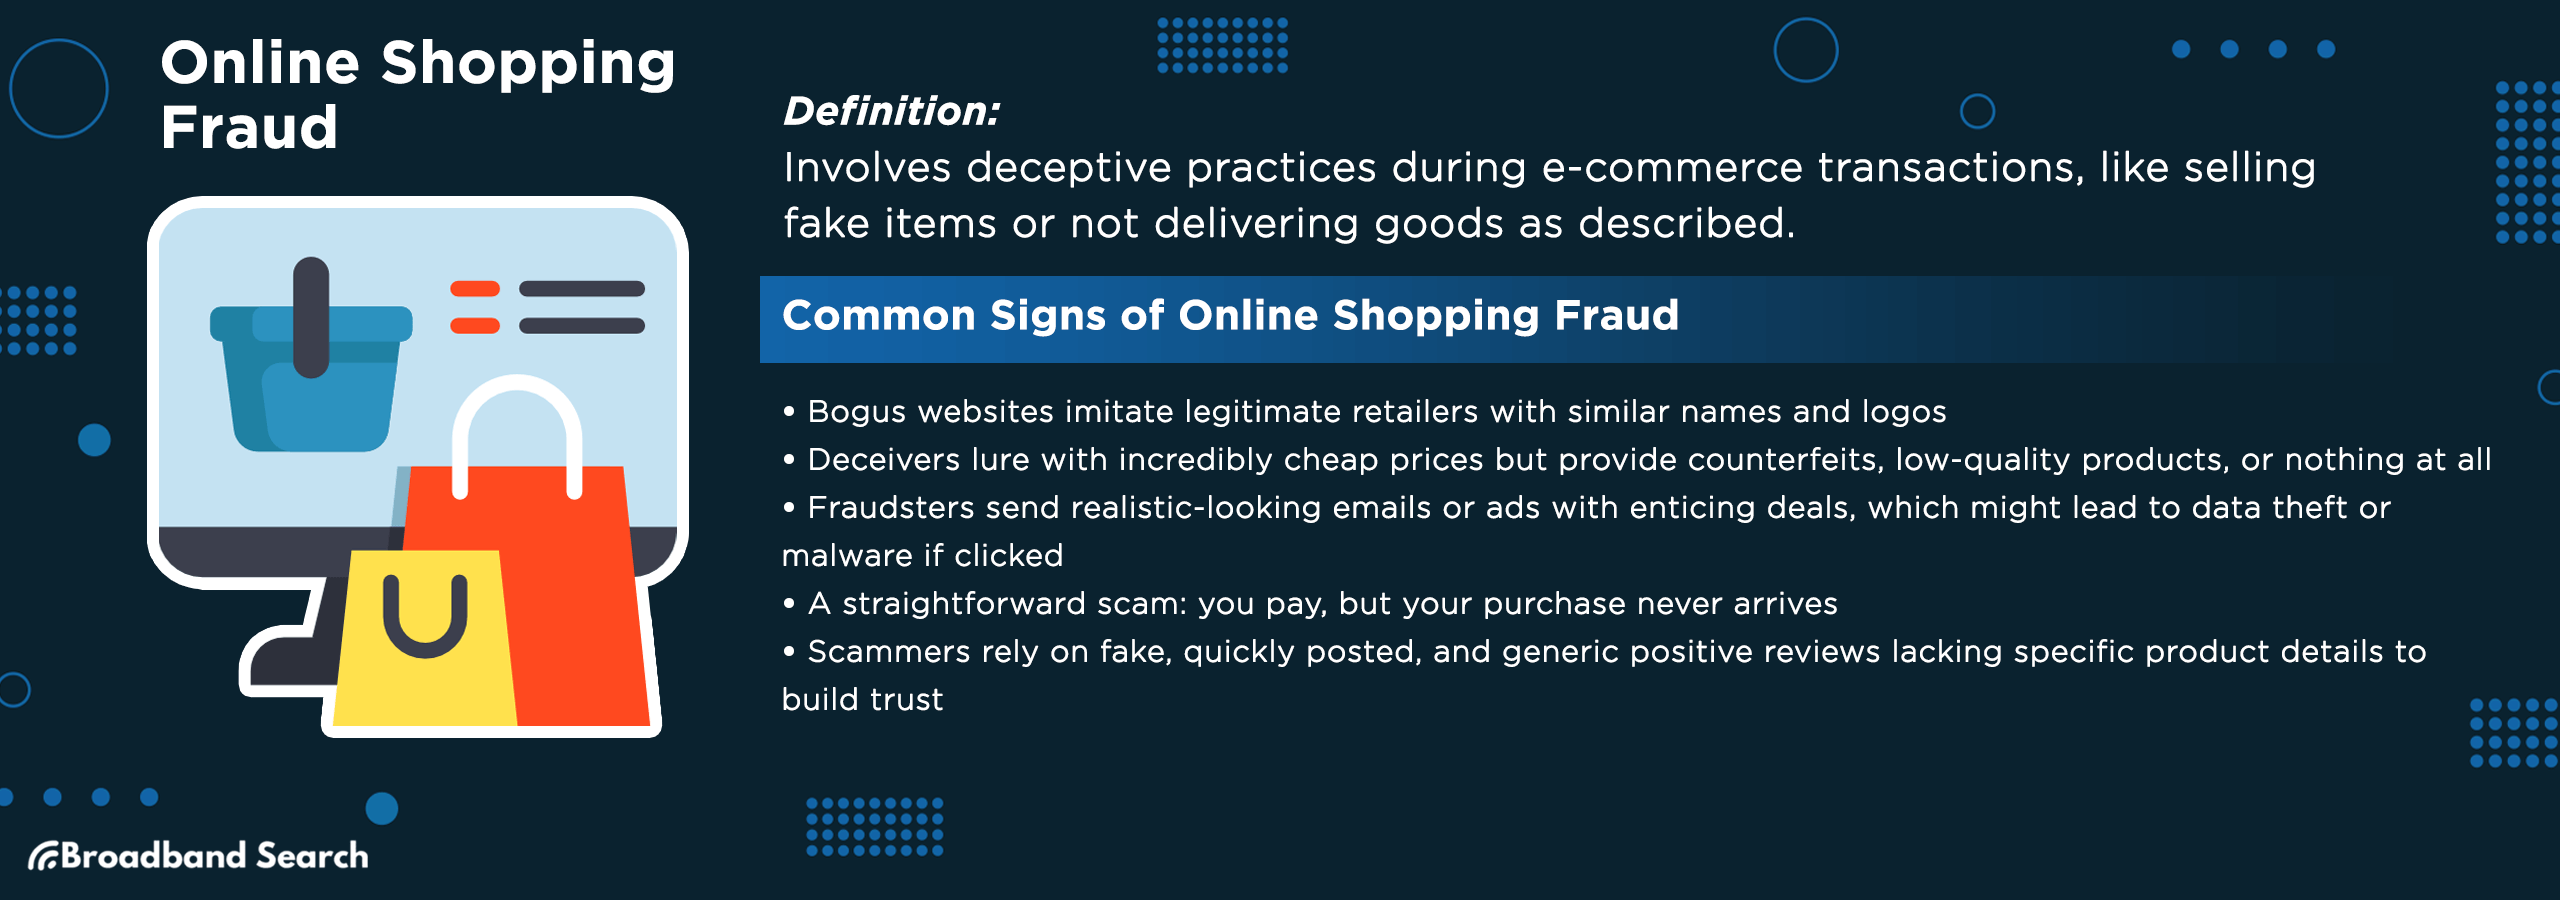 Definition and signs of online shopping fraud